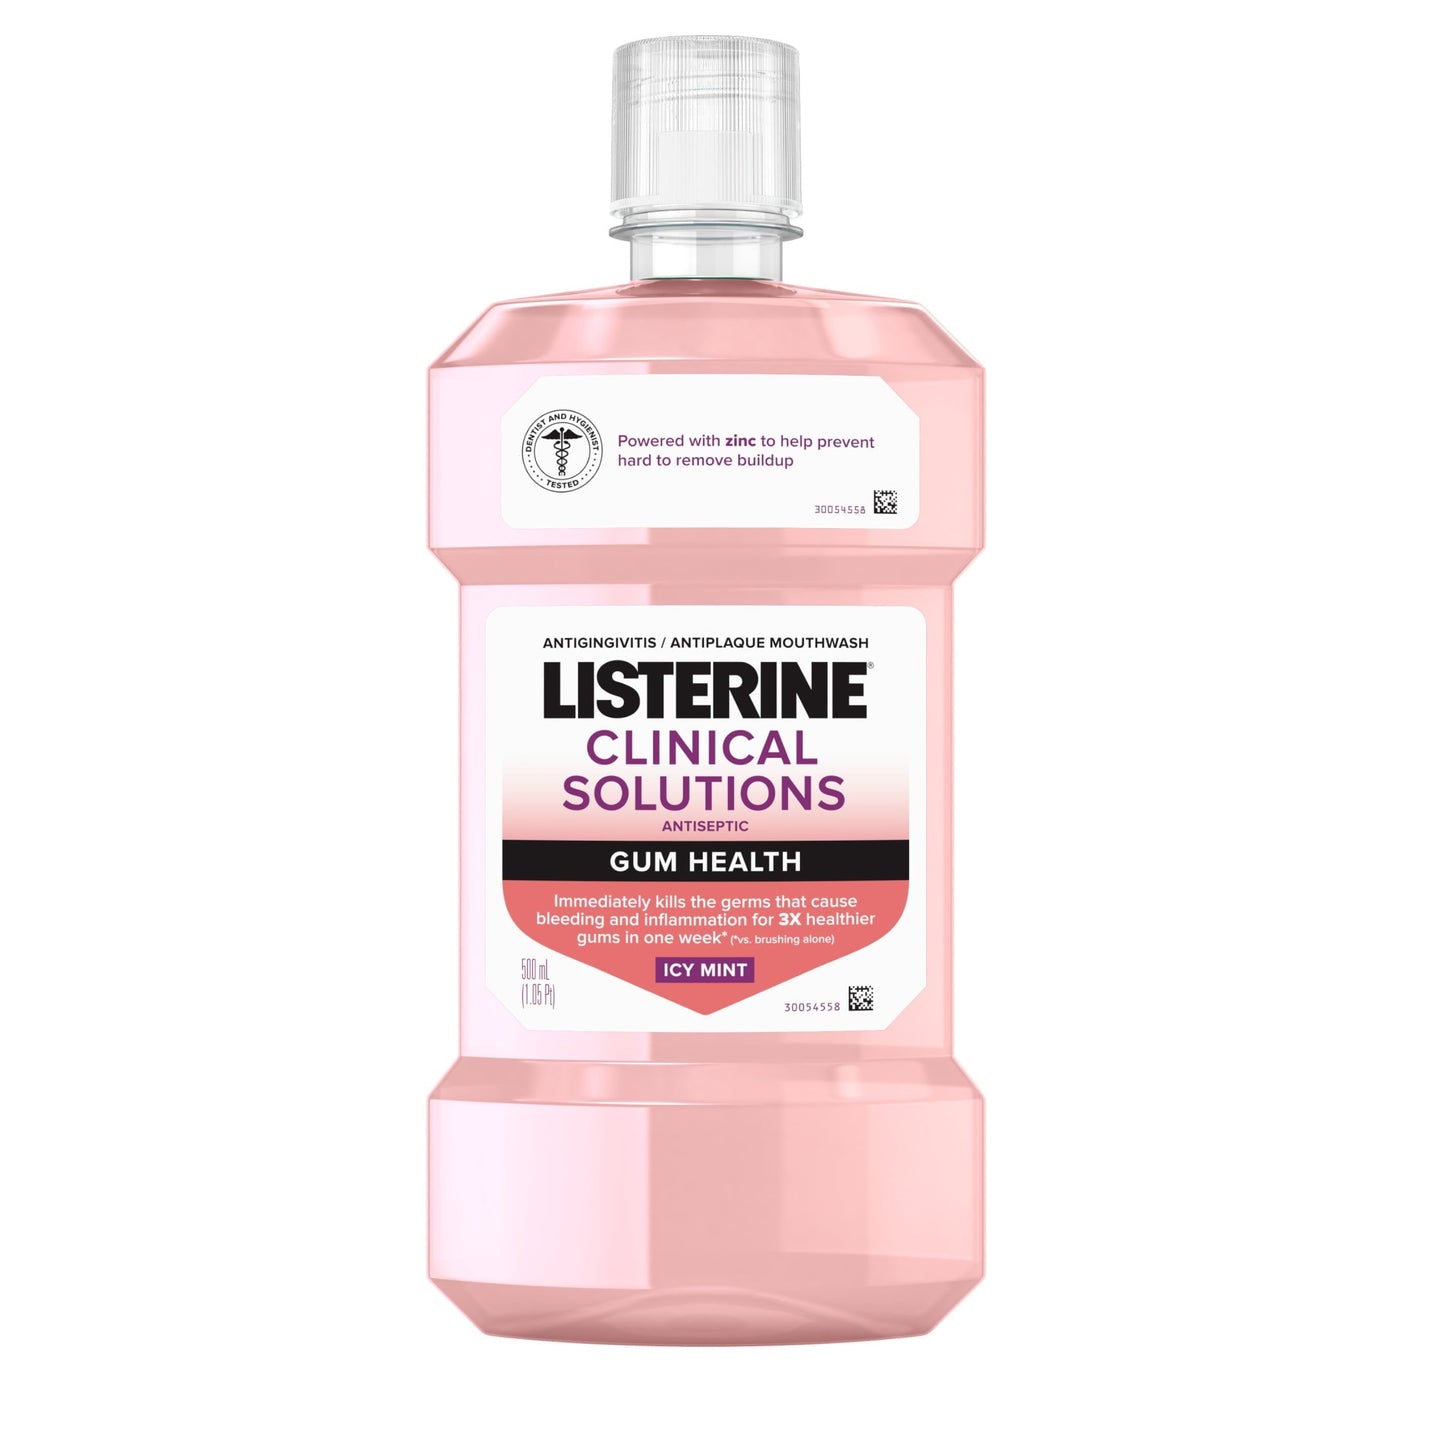 Listerine Clinical Solutions Gum Health Antiseptic Mouthwash, 500 mL